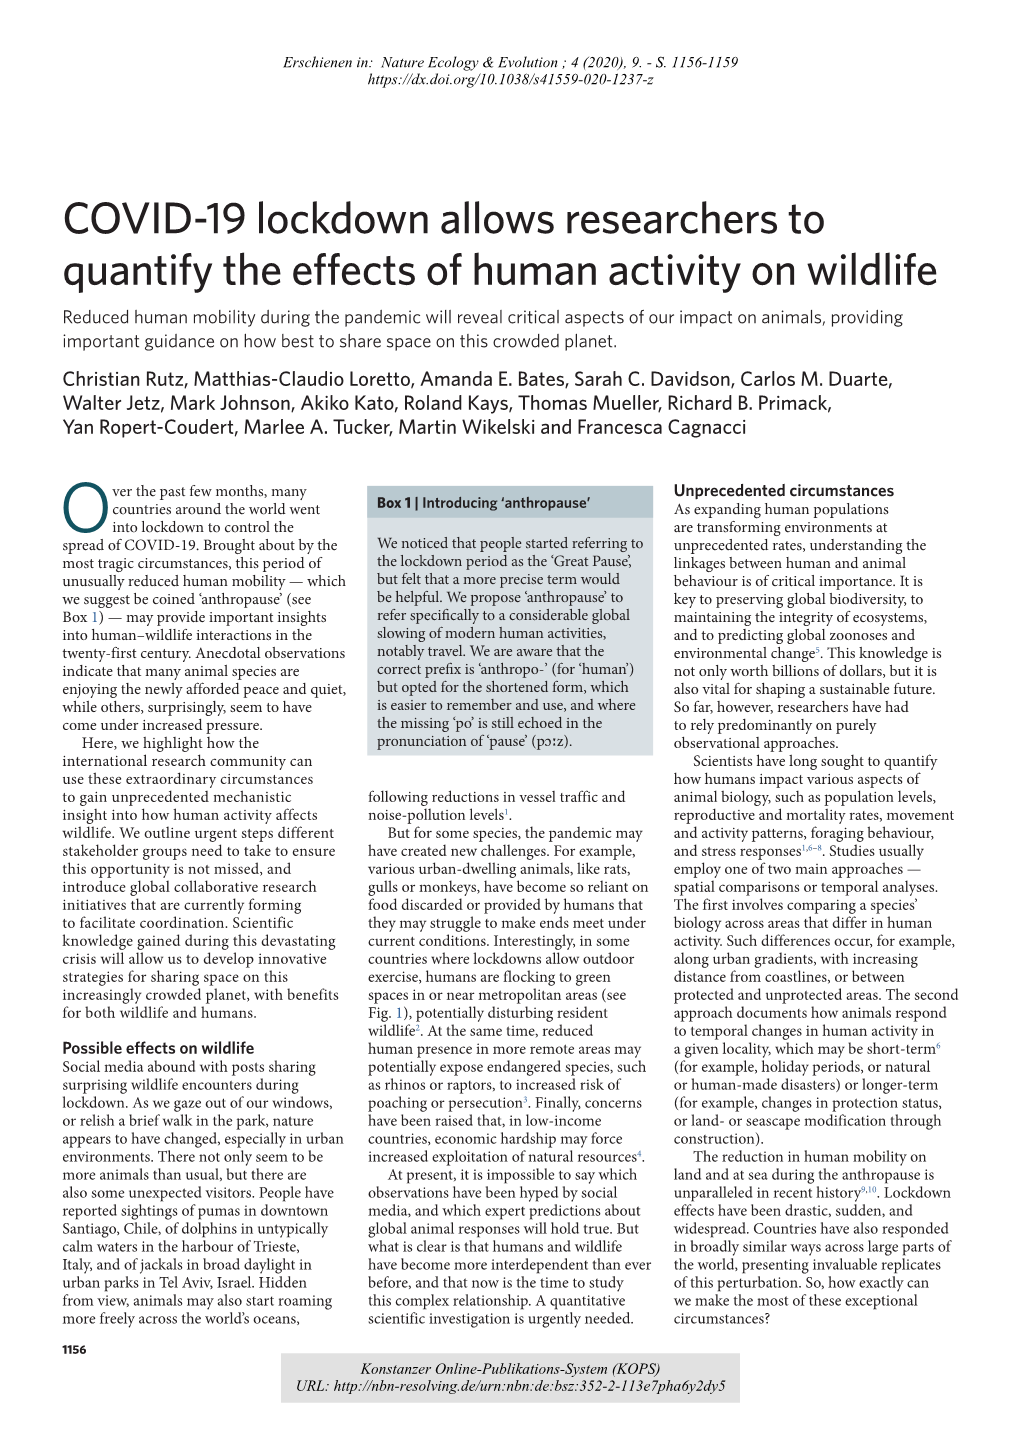 COVID-19 Lockdown Allows Researchers to Quantify the Effects of Human Activity on Wildlife